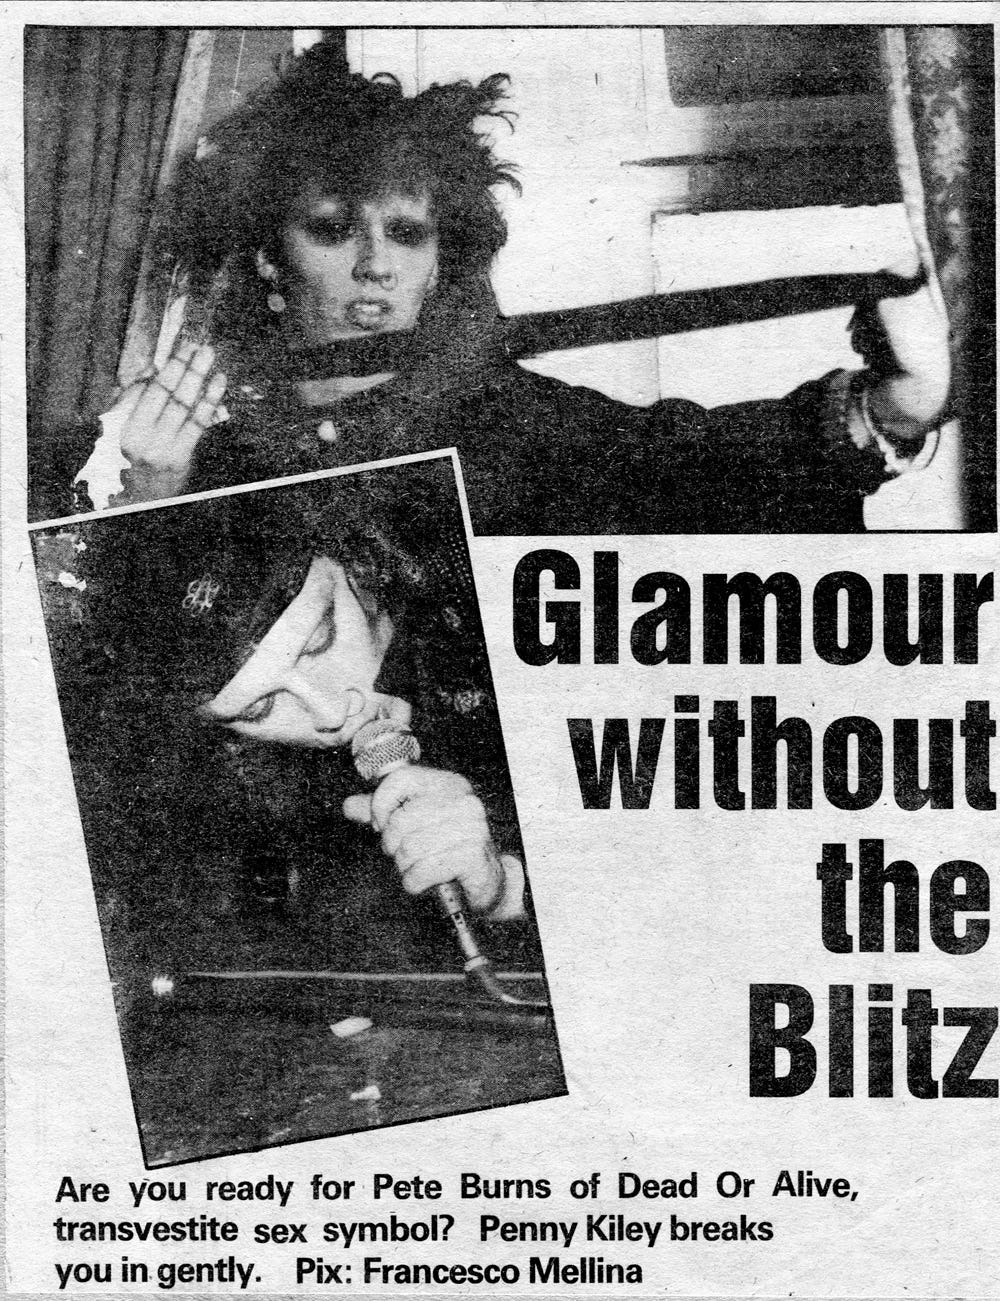 Title page of the original cutting. There are two photos of Pete Burns, one with the famous black contact lenses and one closeup of his face and a microphone. The headline is "Glamour without the Blitz".